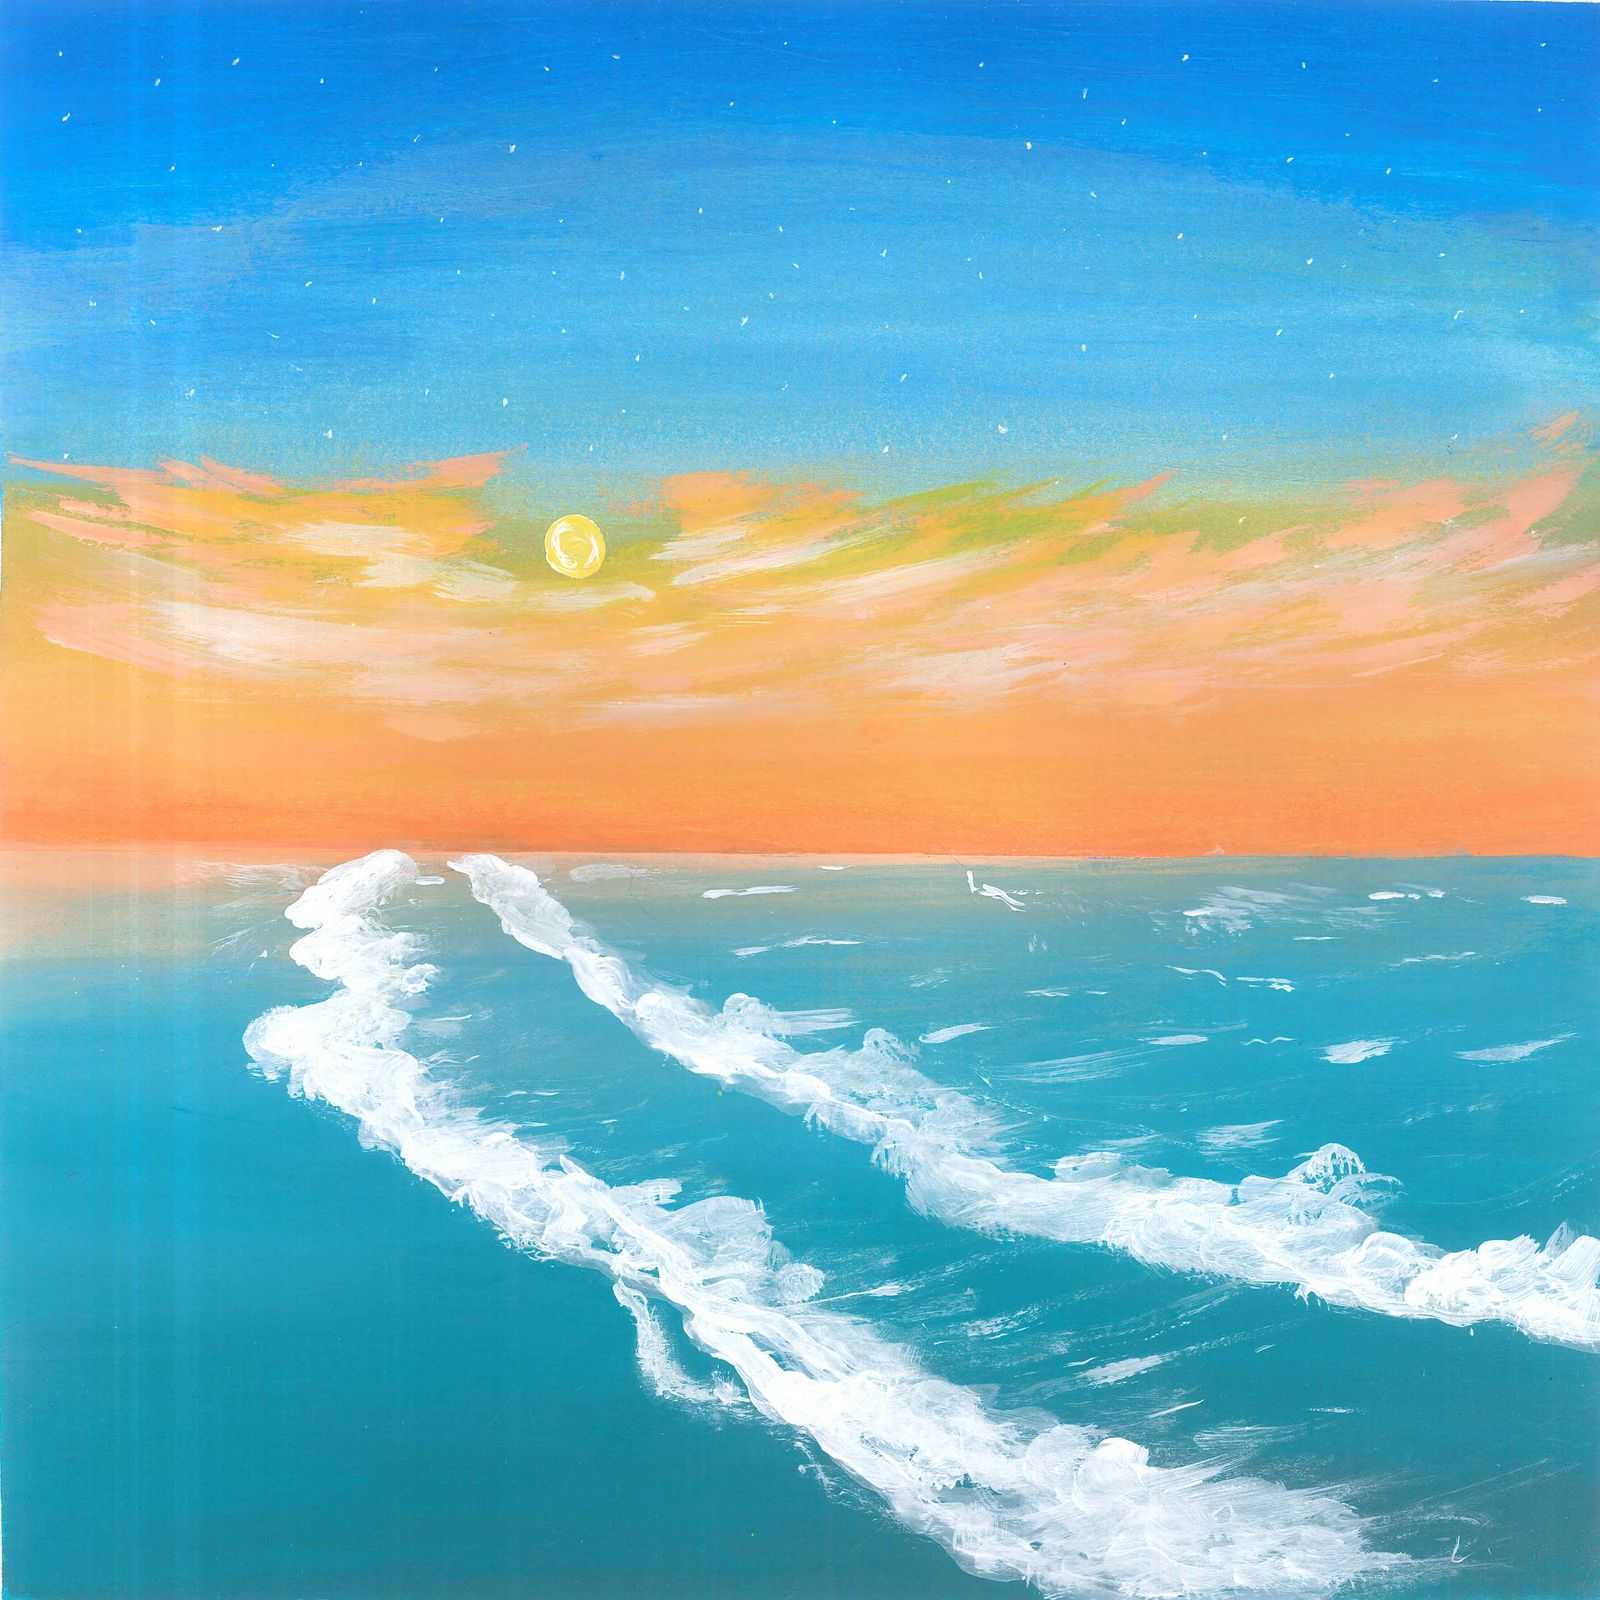 Waves sounds at night in San Carlos - nature landscape painting - earth.fm